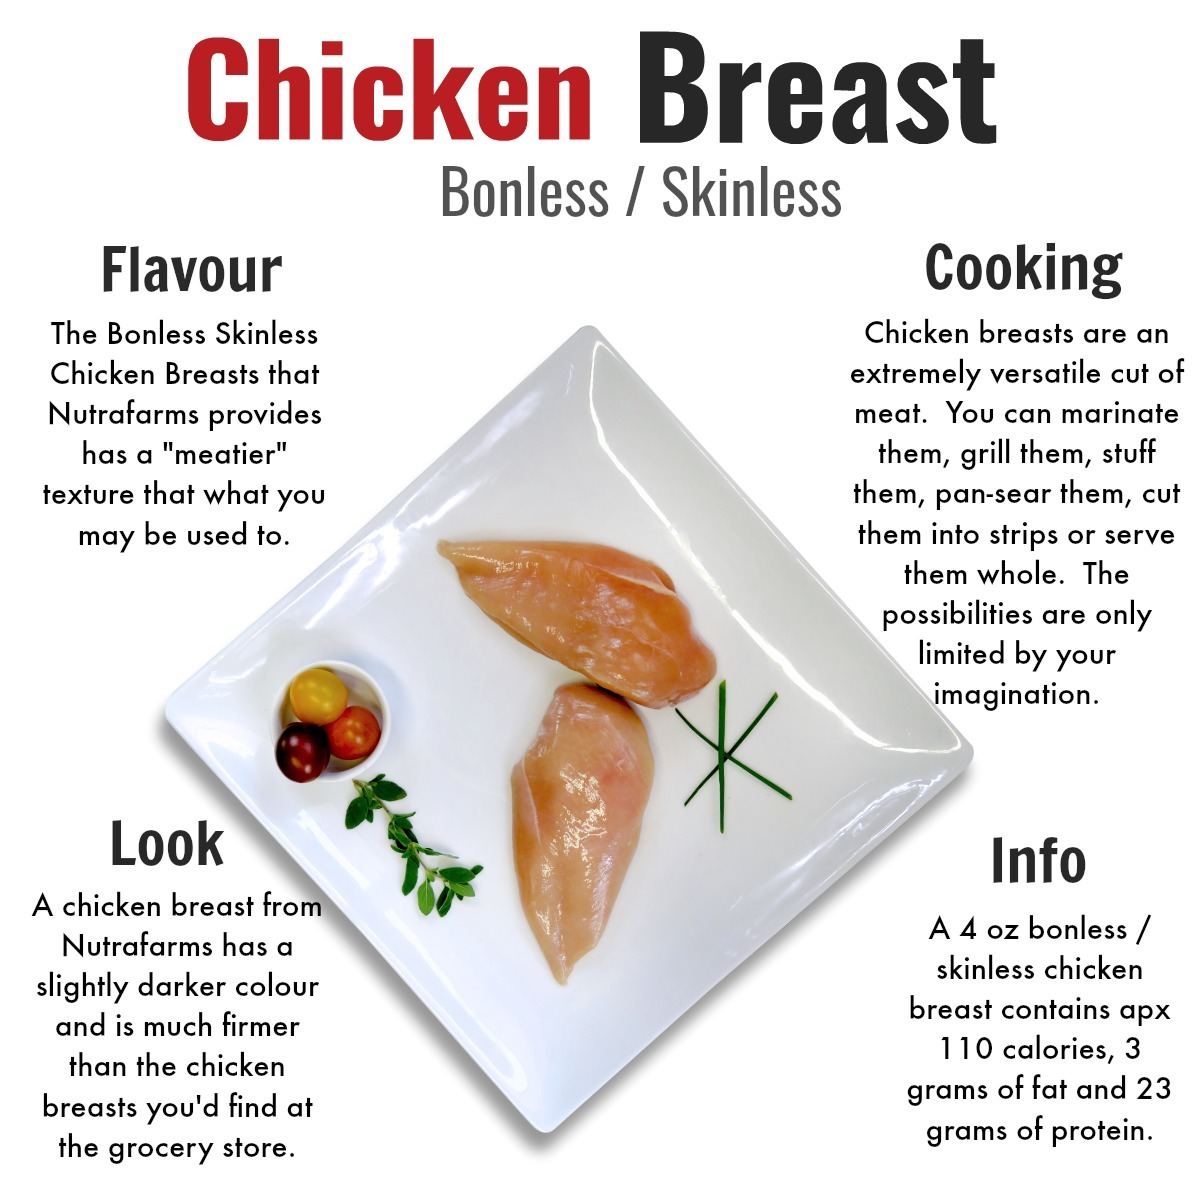 Affordable Chicken delivery near me breast thigh drumstick wings whole chicken - Nutrafarms - Free Range Chicken Breast